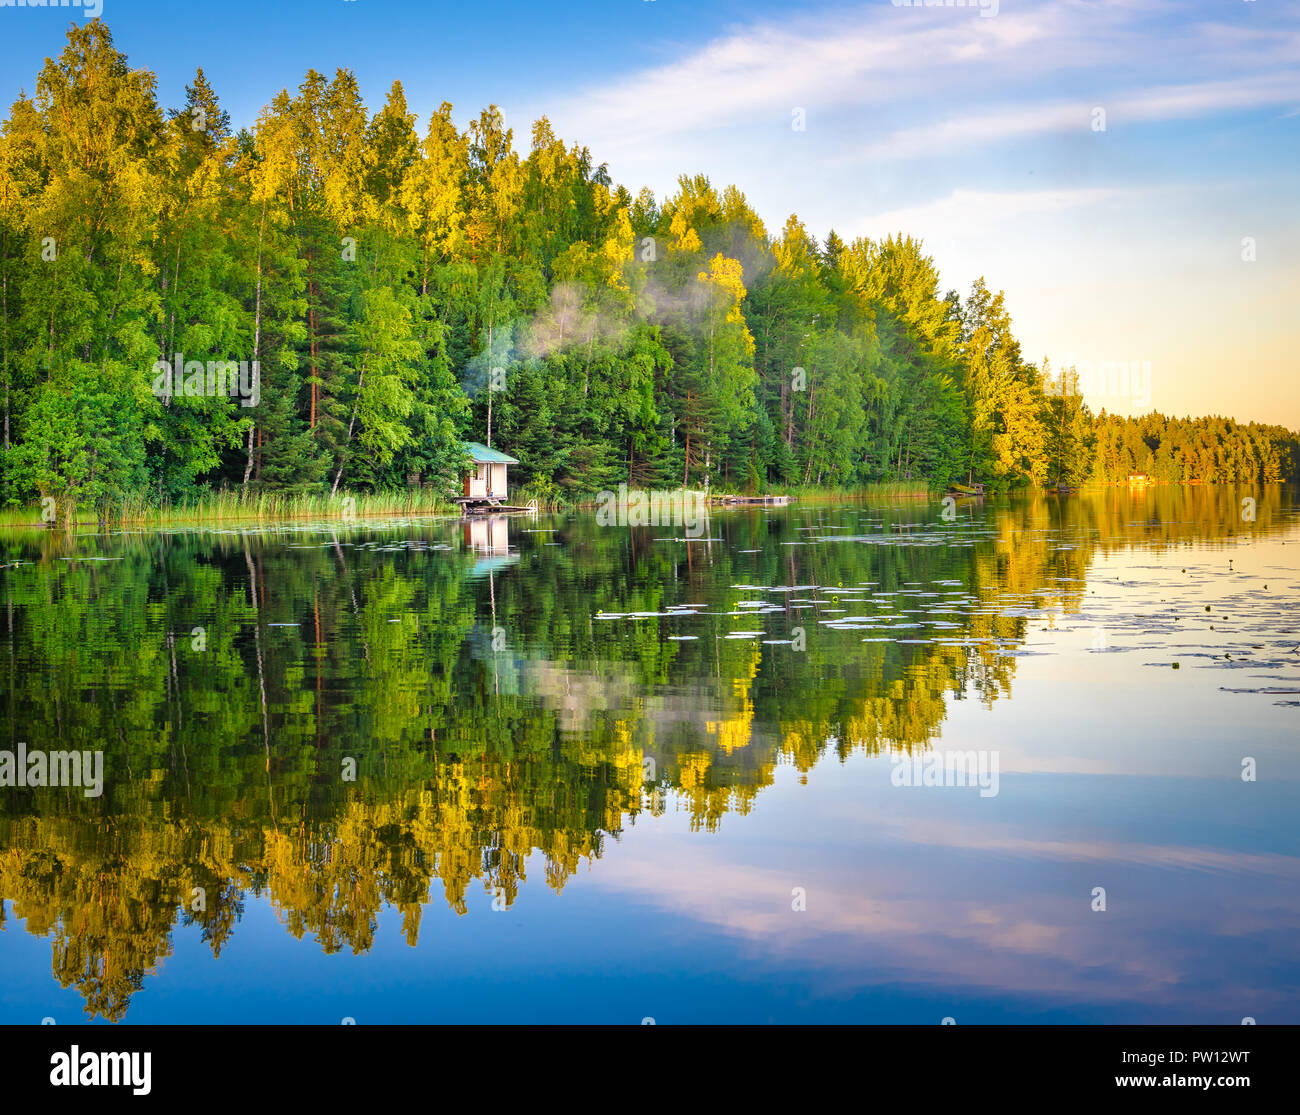 Lake in Tampere Finland, lake reflections on water with little house on the water, beautiful sky with many colors and trees Stock Photo